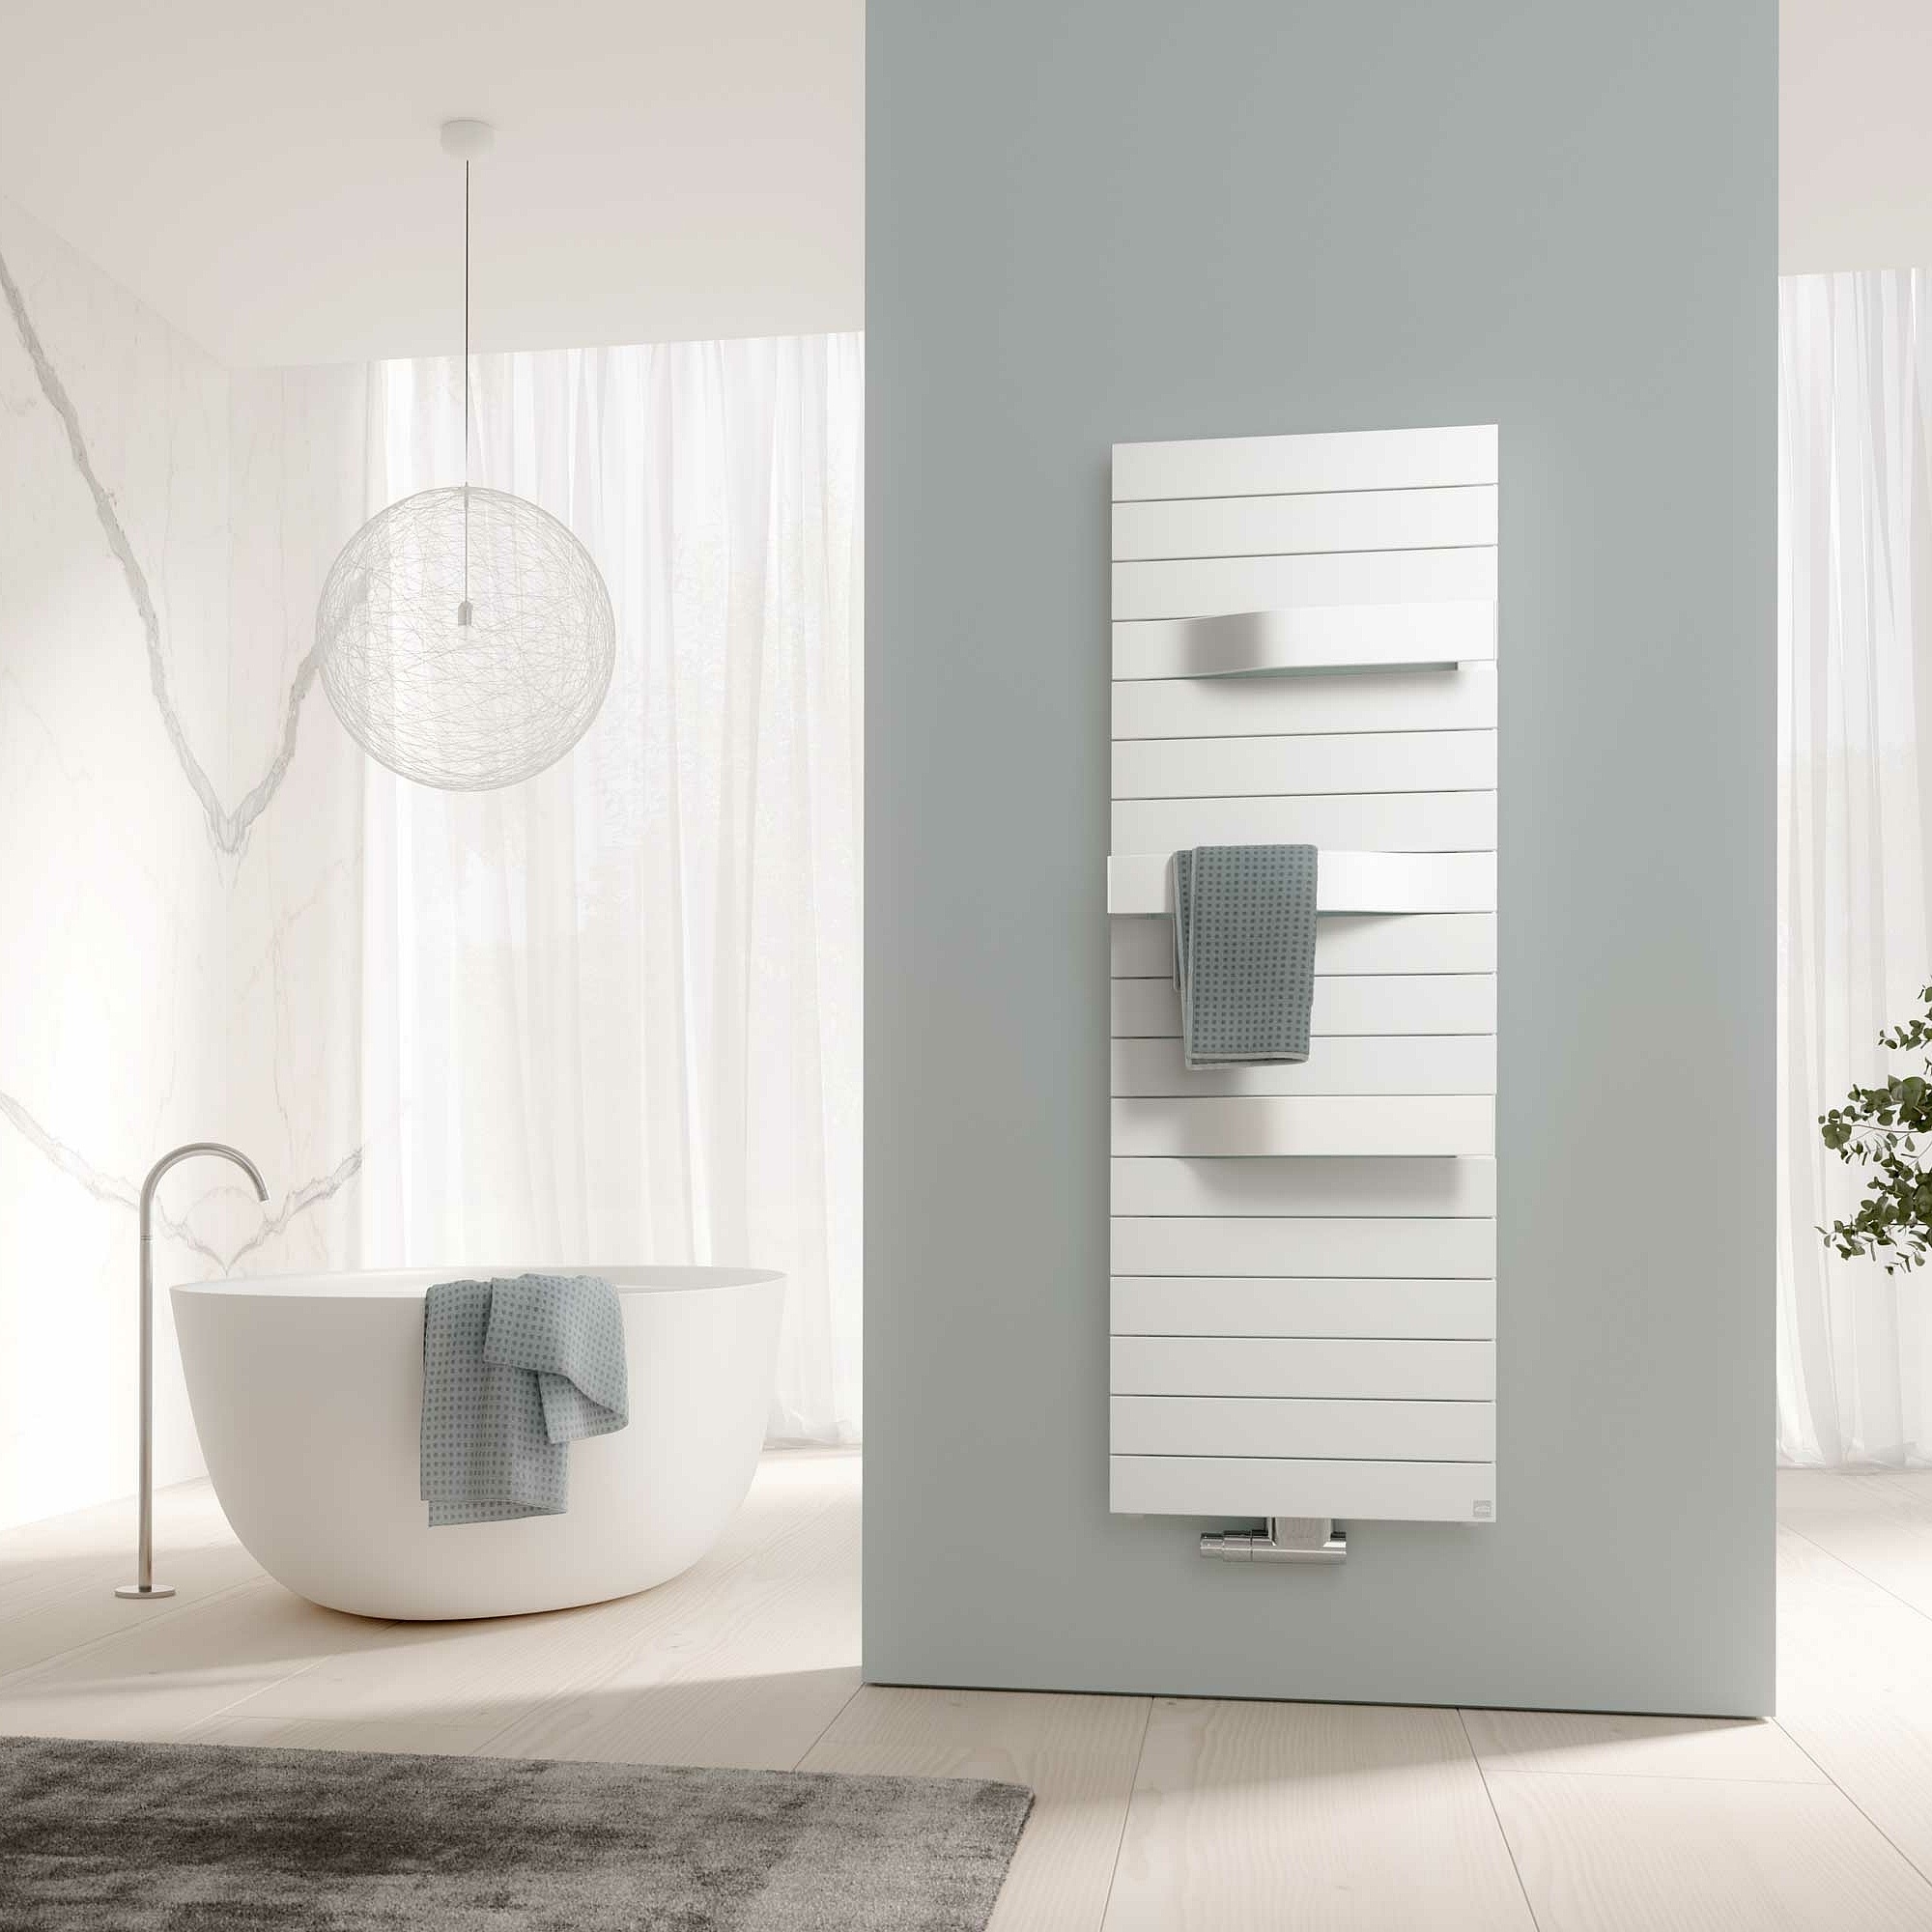 Kermi Tabeo design and bathroom radiators – experience beauty and comfort in one.